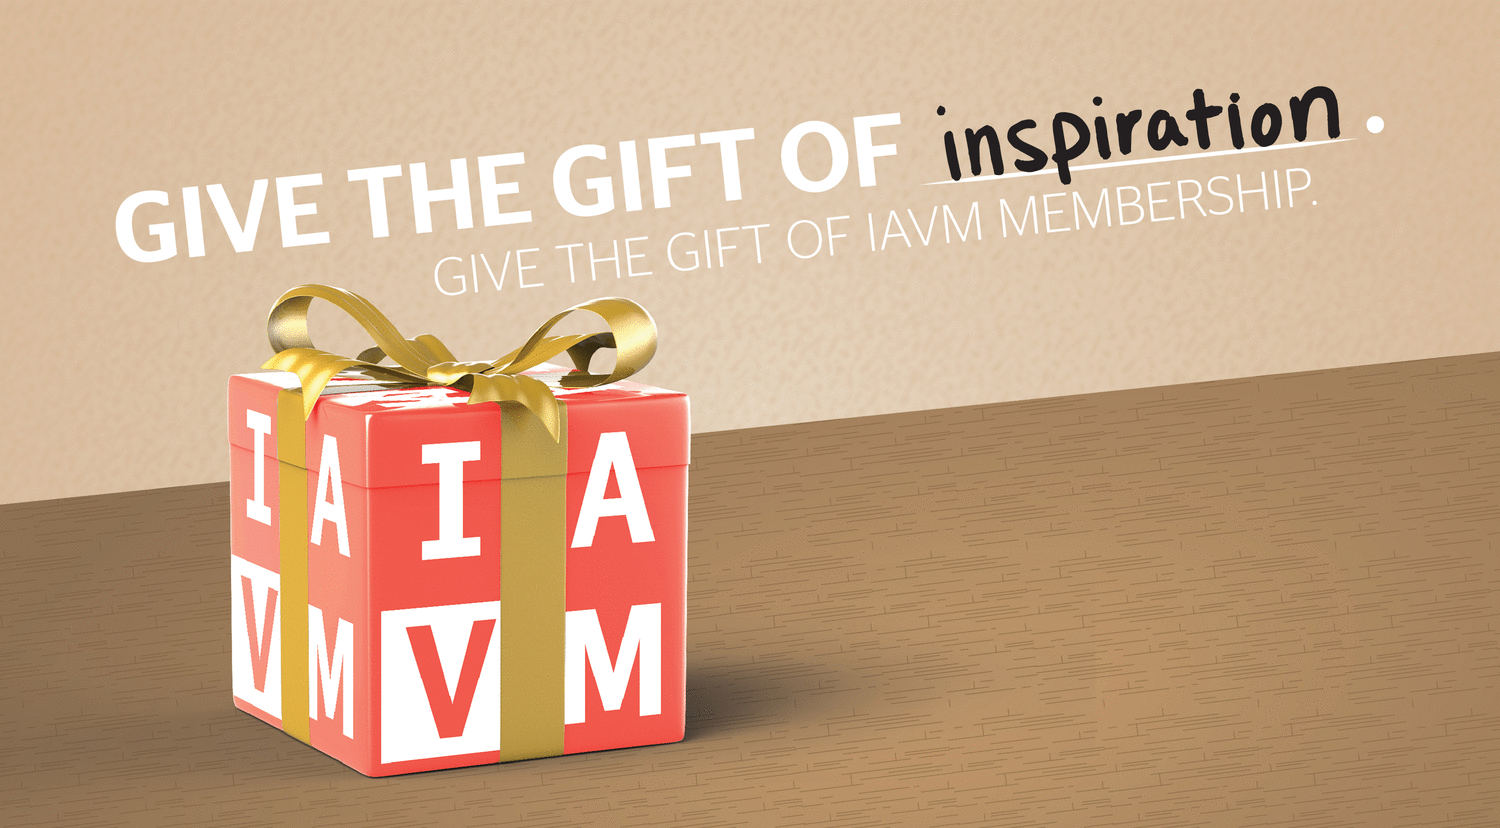 Give the Gift of IAVM